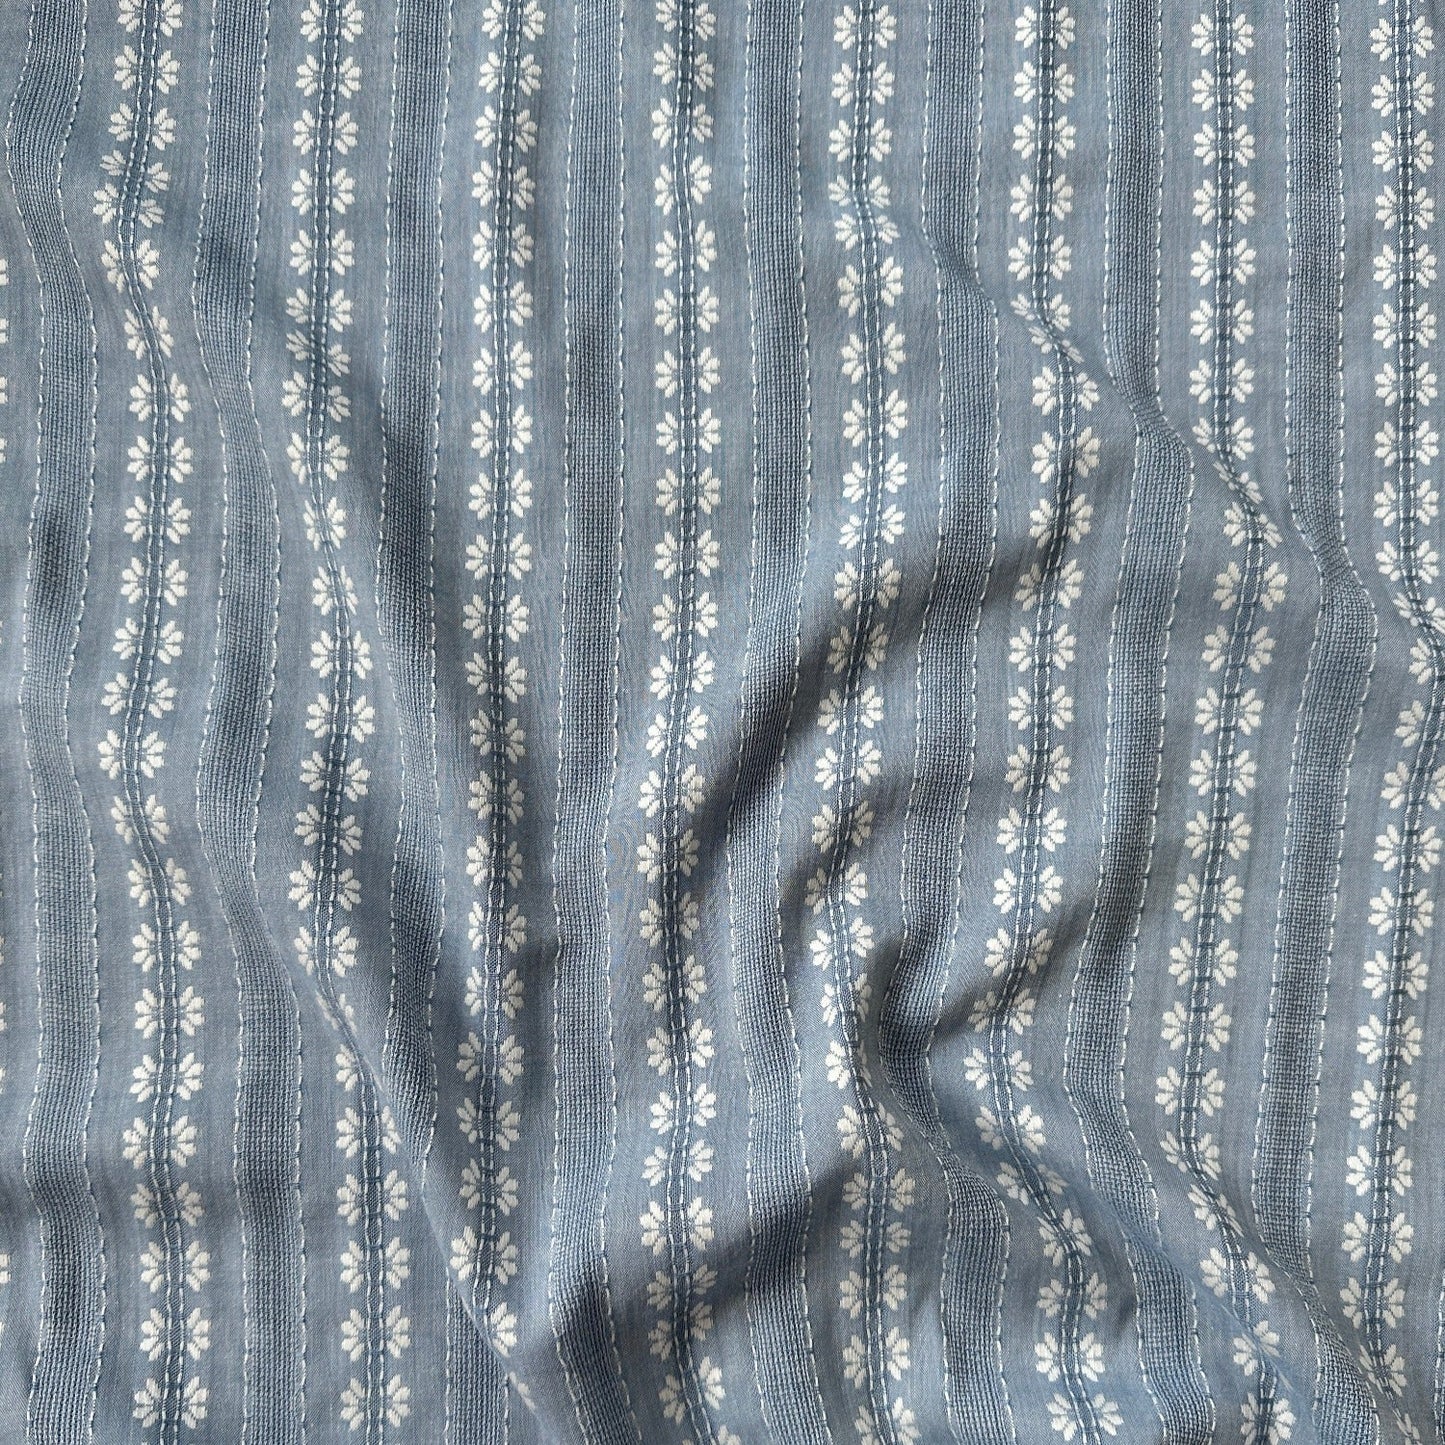 Embroidered Flowers Striped Cotton Rayon Fabric in Light Denim Blue - 1m